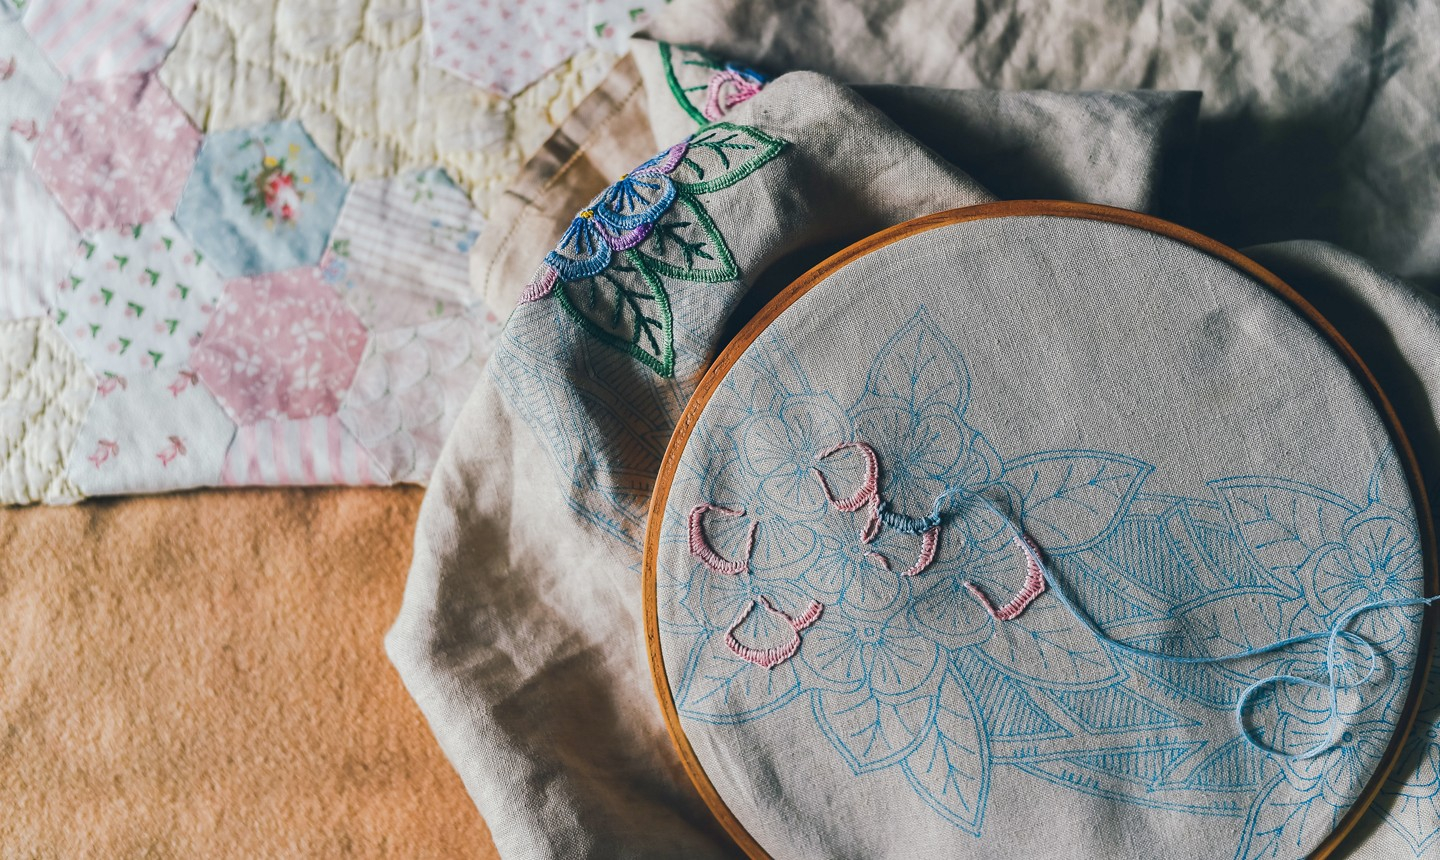 Diy Embroidery Patterns 5 Simple Ways To Transfer Embroidery Designs